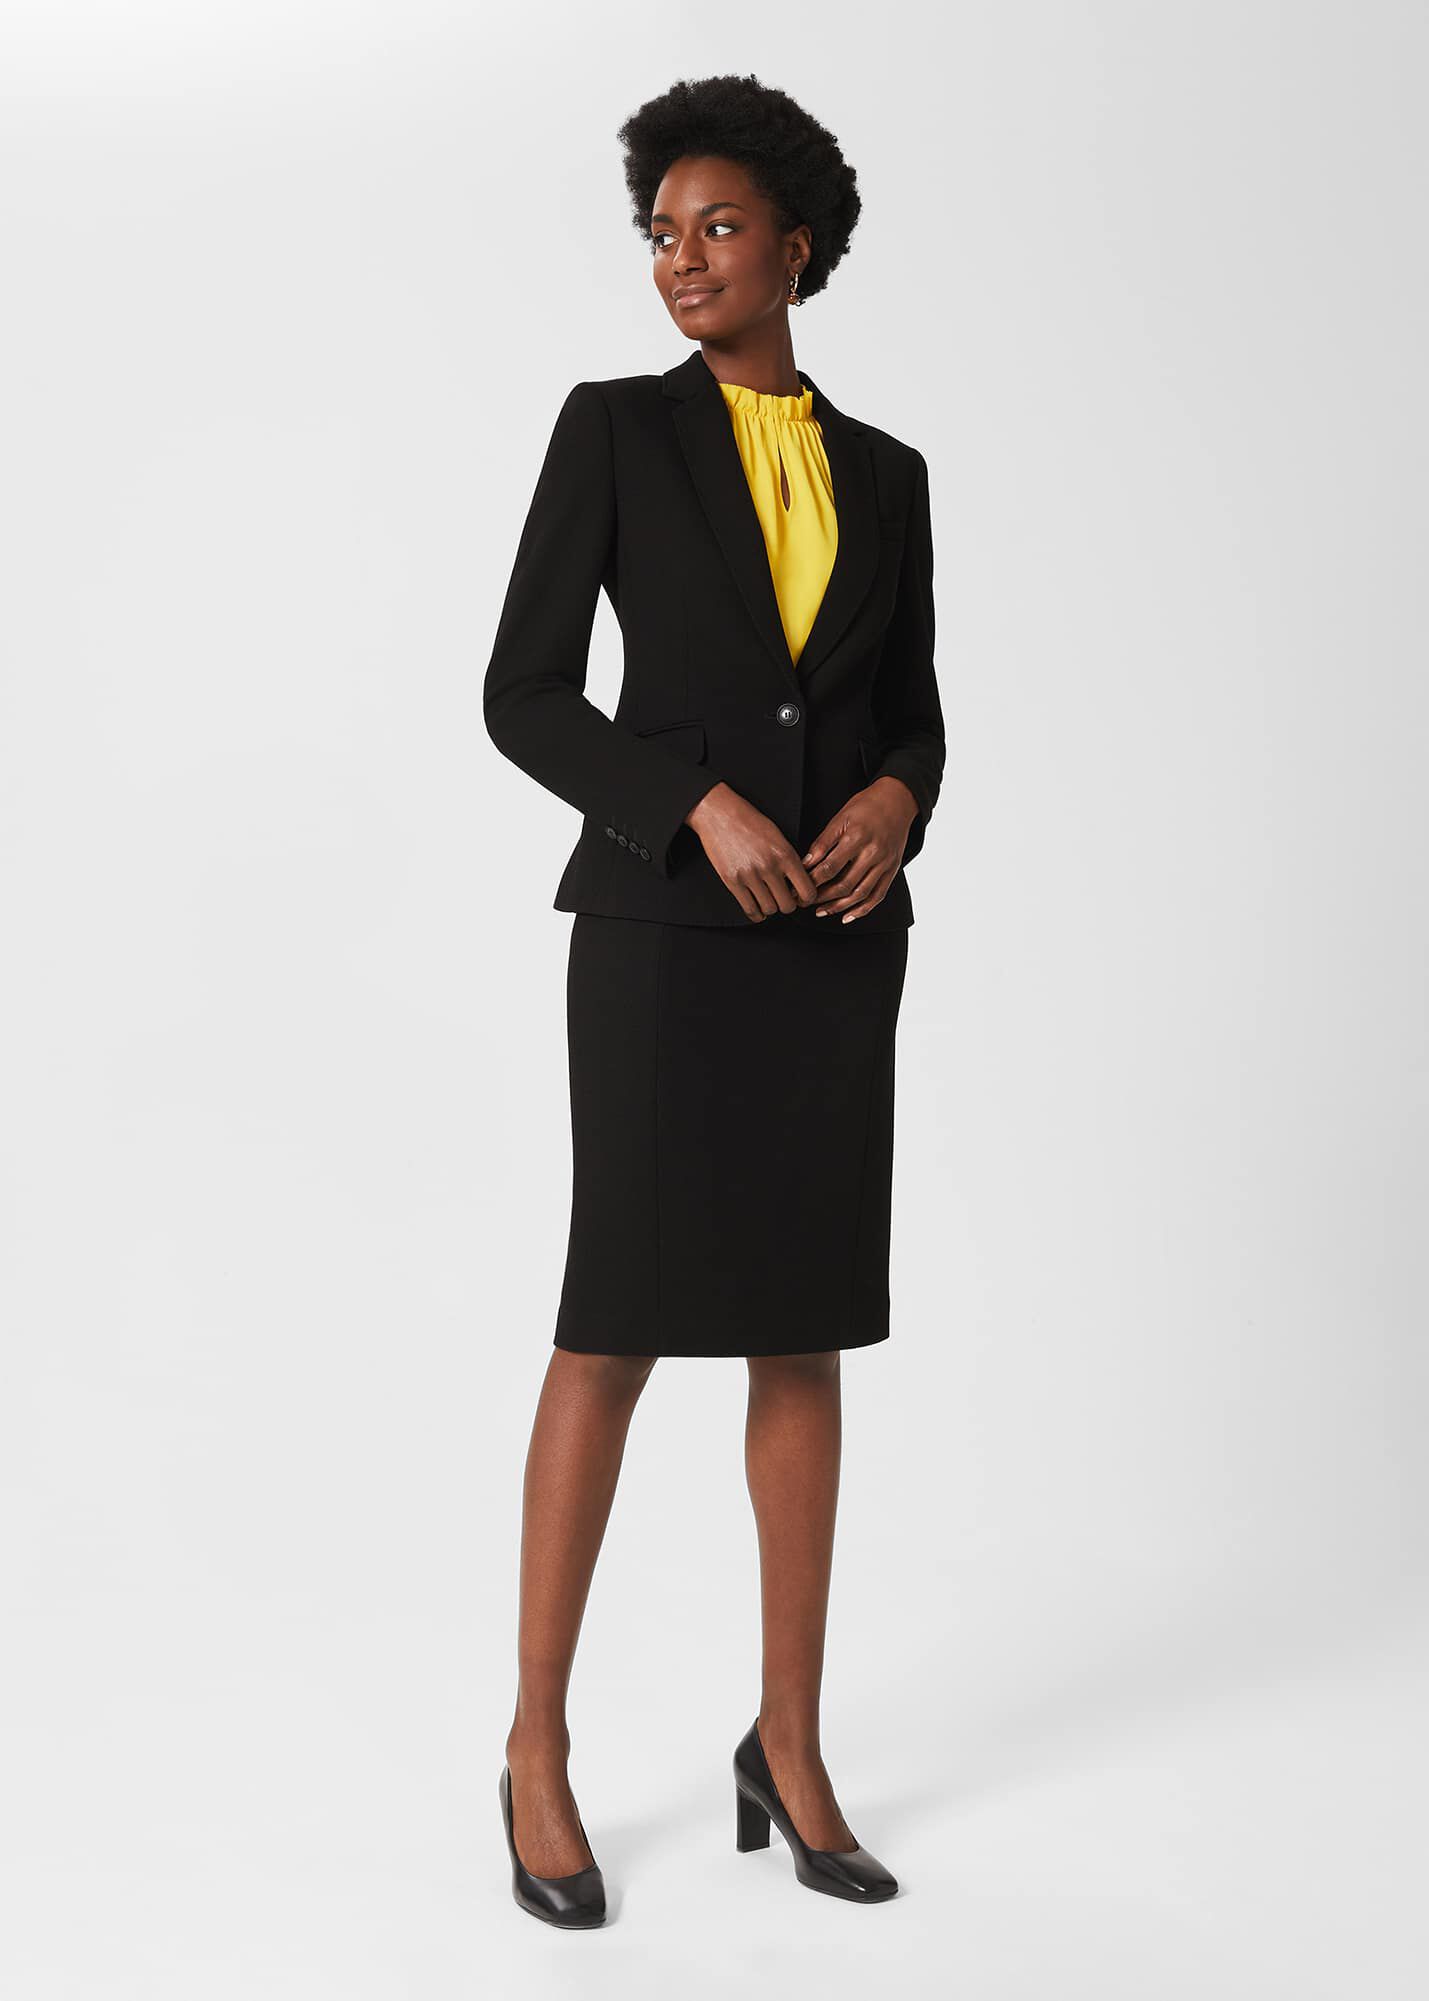 Ophelia Skirt Suit Outfit |